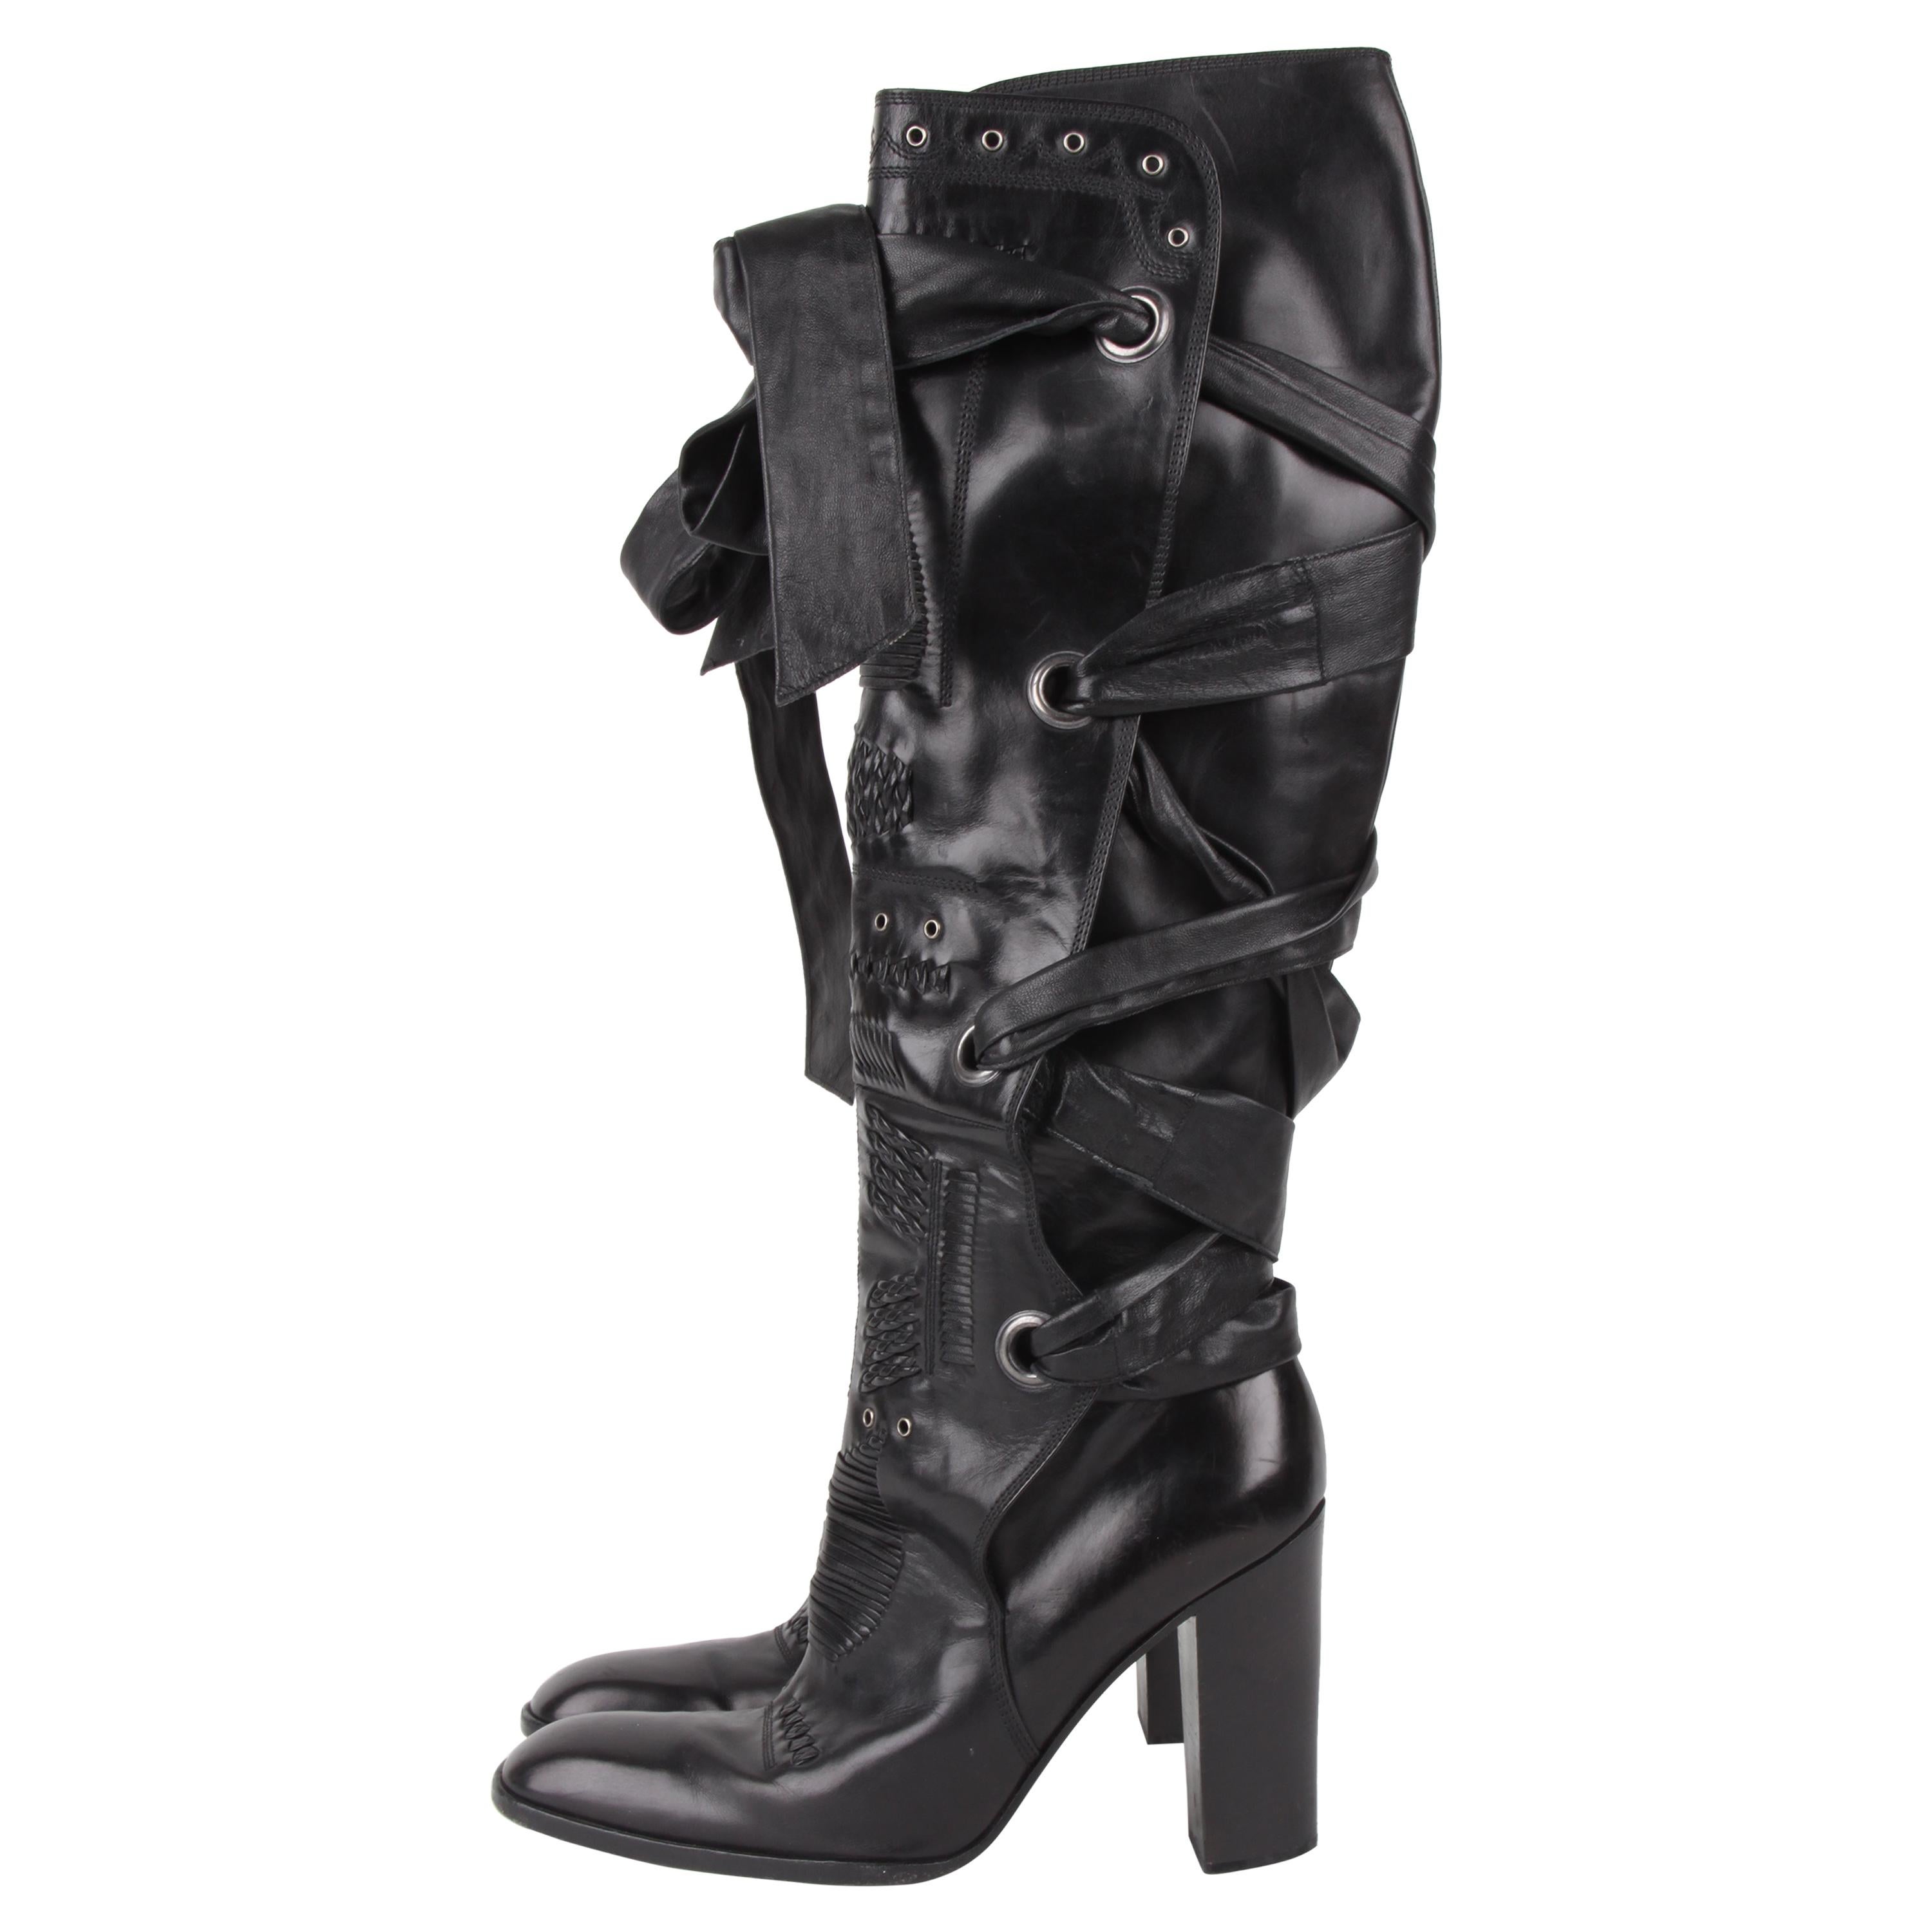 Yves Saint Laurent Rive Gauche by Tom Ford Black Laced Up Knee High Boots For Sale